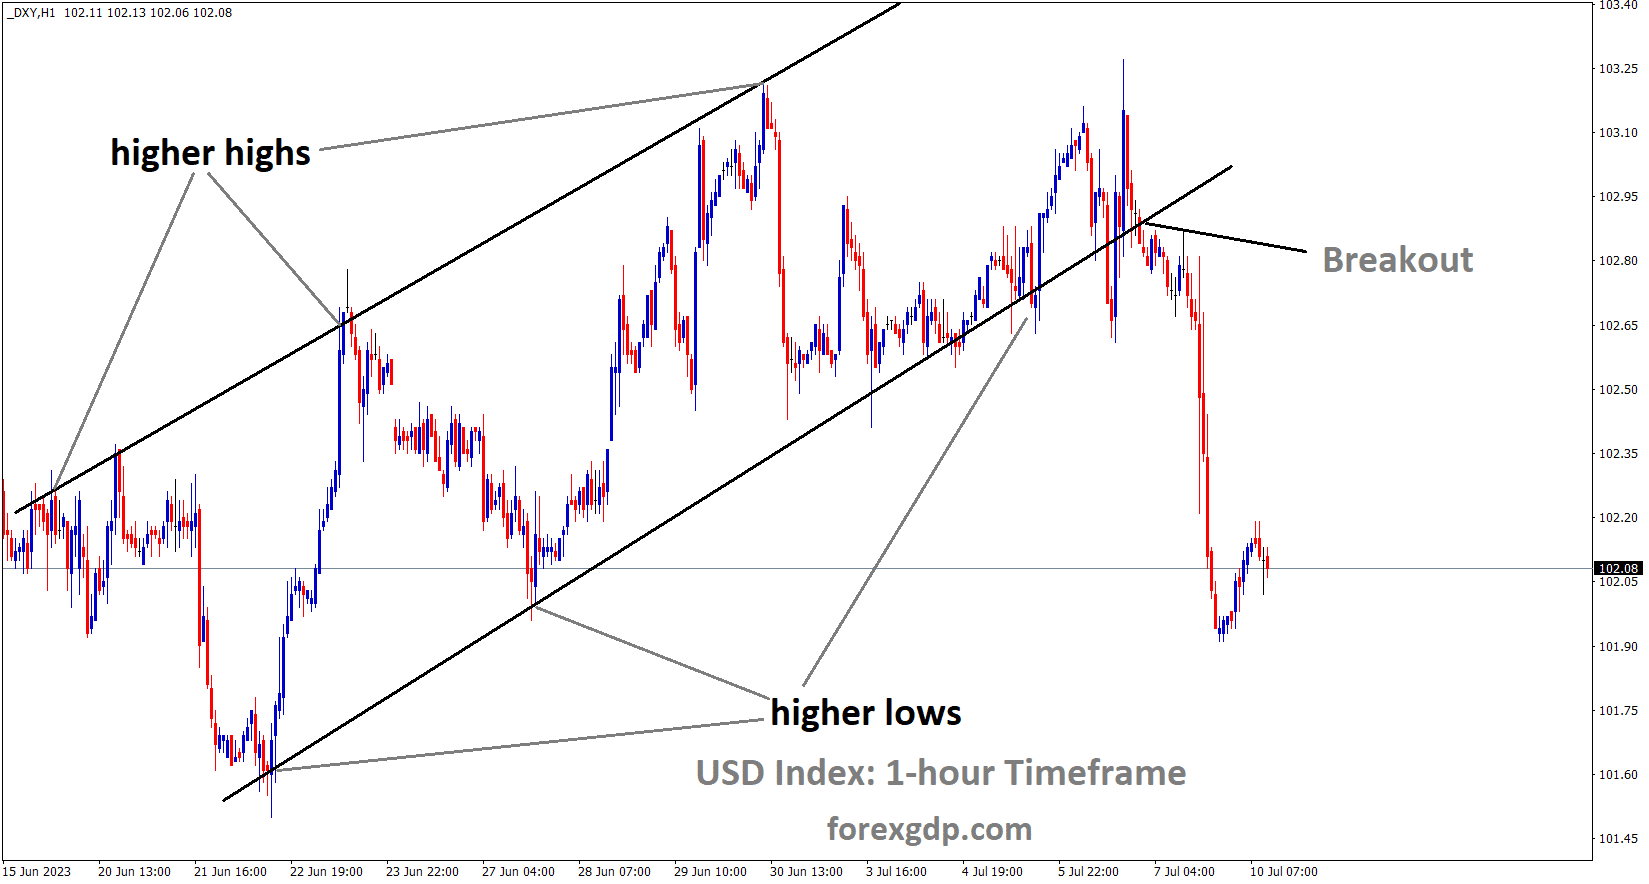 DXY US Dollar index has broken the Ascending channel in downside